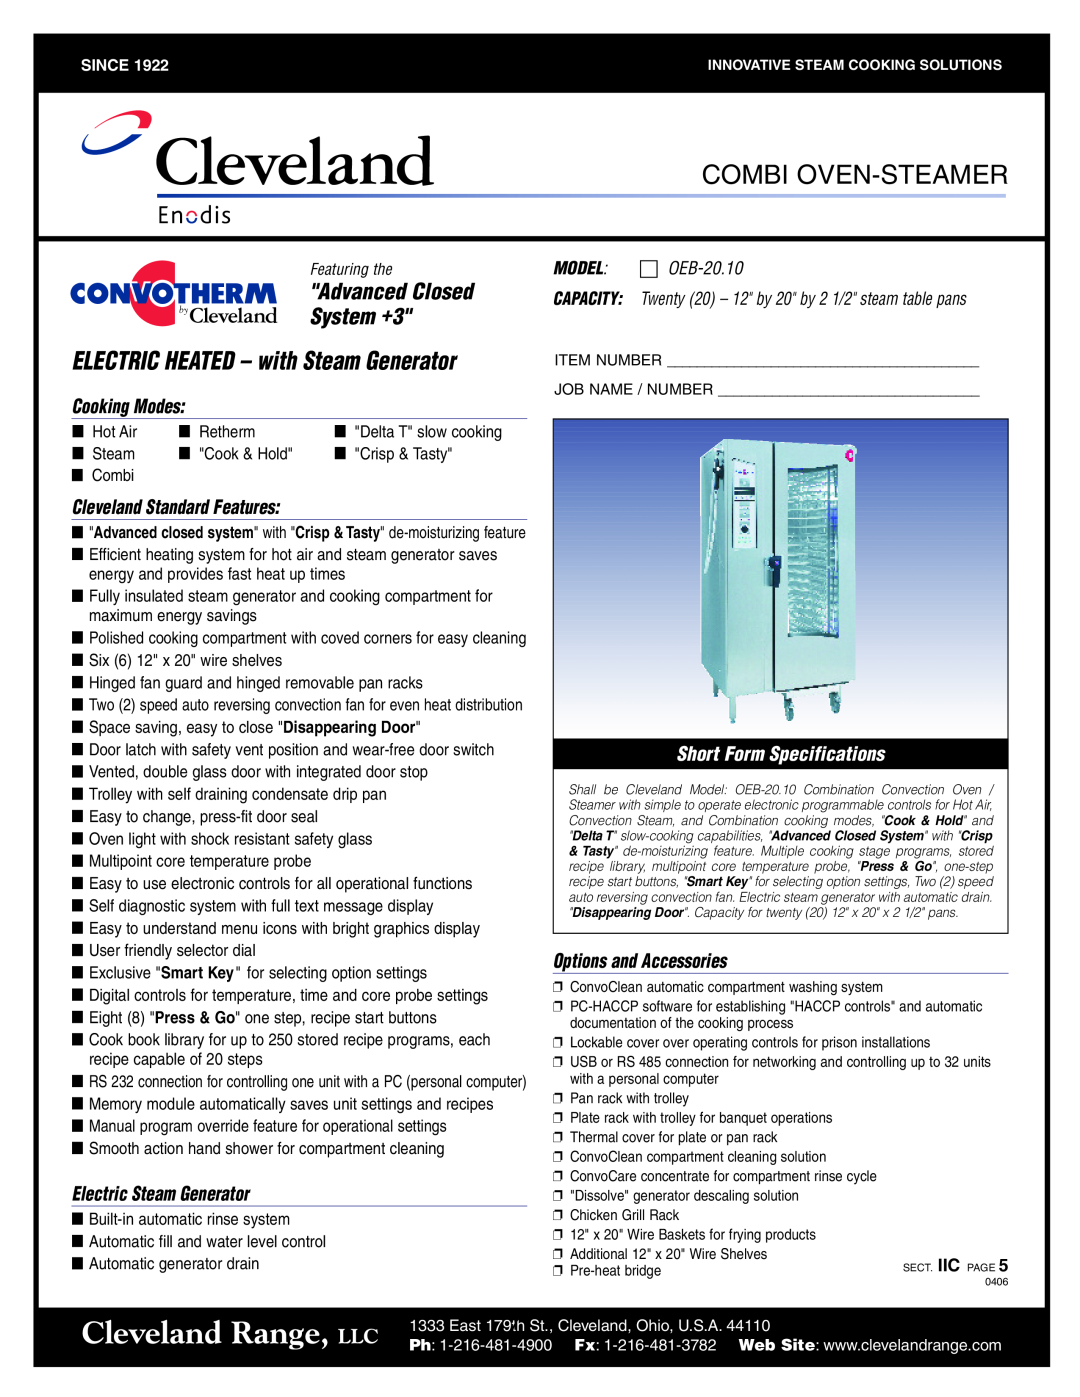 Cleveland Range OES-20.20 Cleveland Range, LLC, Combi Oven-Steamer, System +3, ELECTRIC HEATED - with Steam Generator 